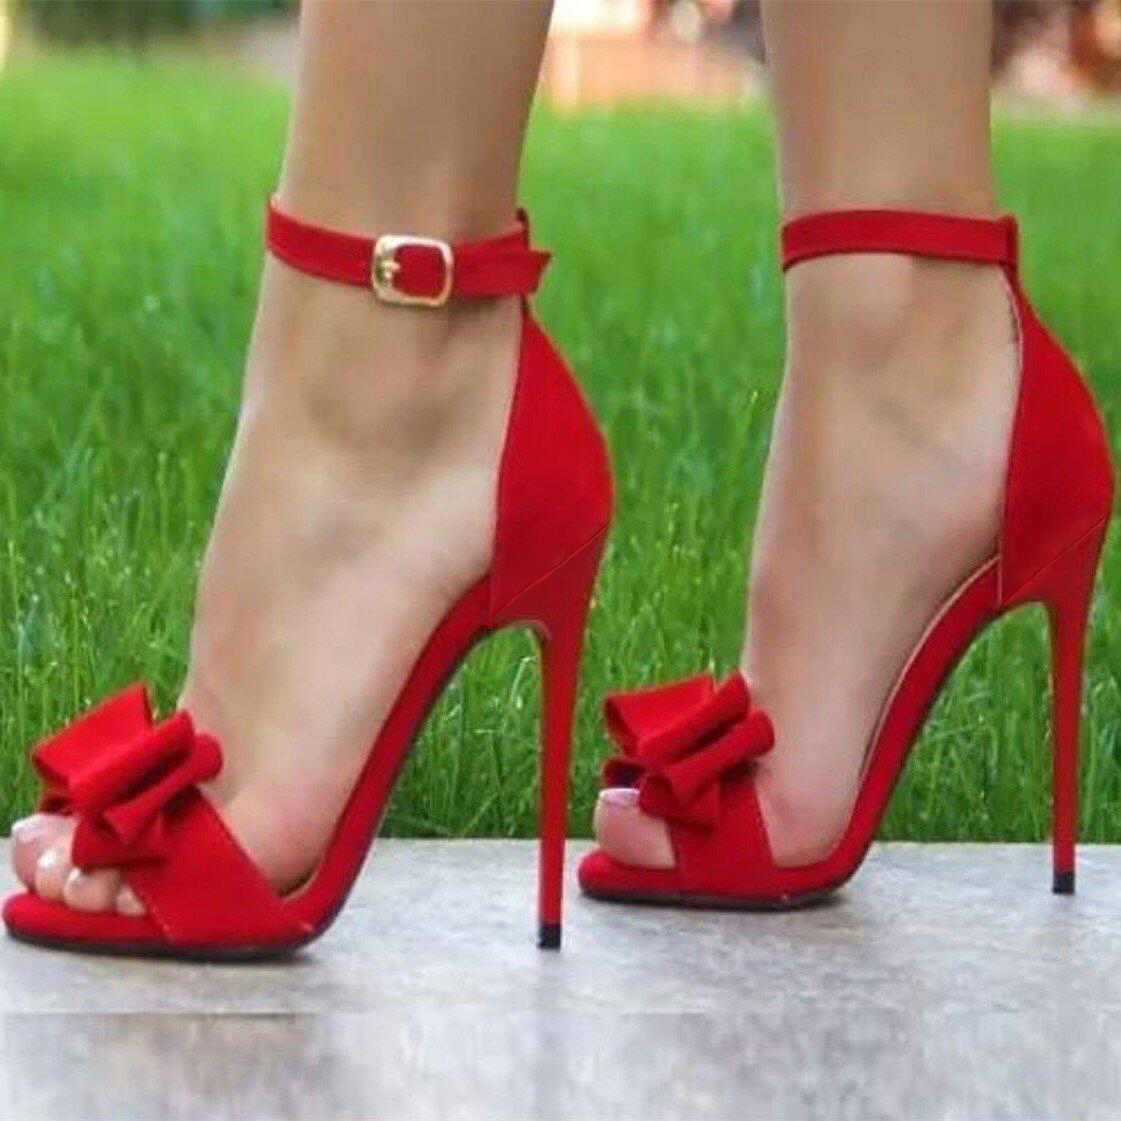 Red Stiletto Heels - Open Toe Dress Sandals with Bow Ankle Strap Vdcoo